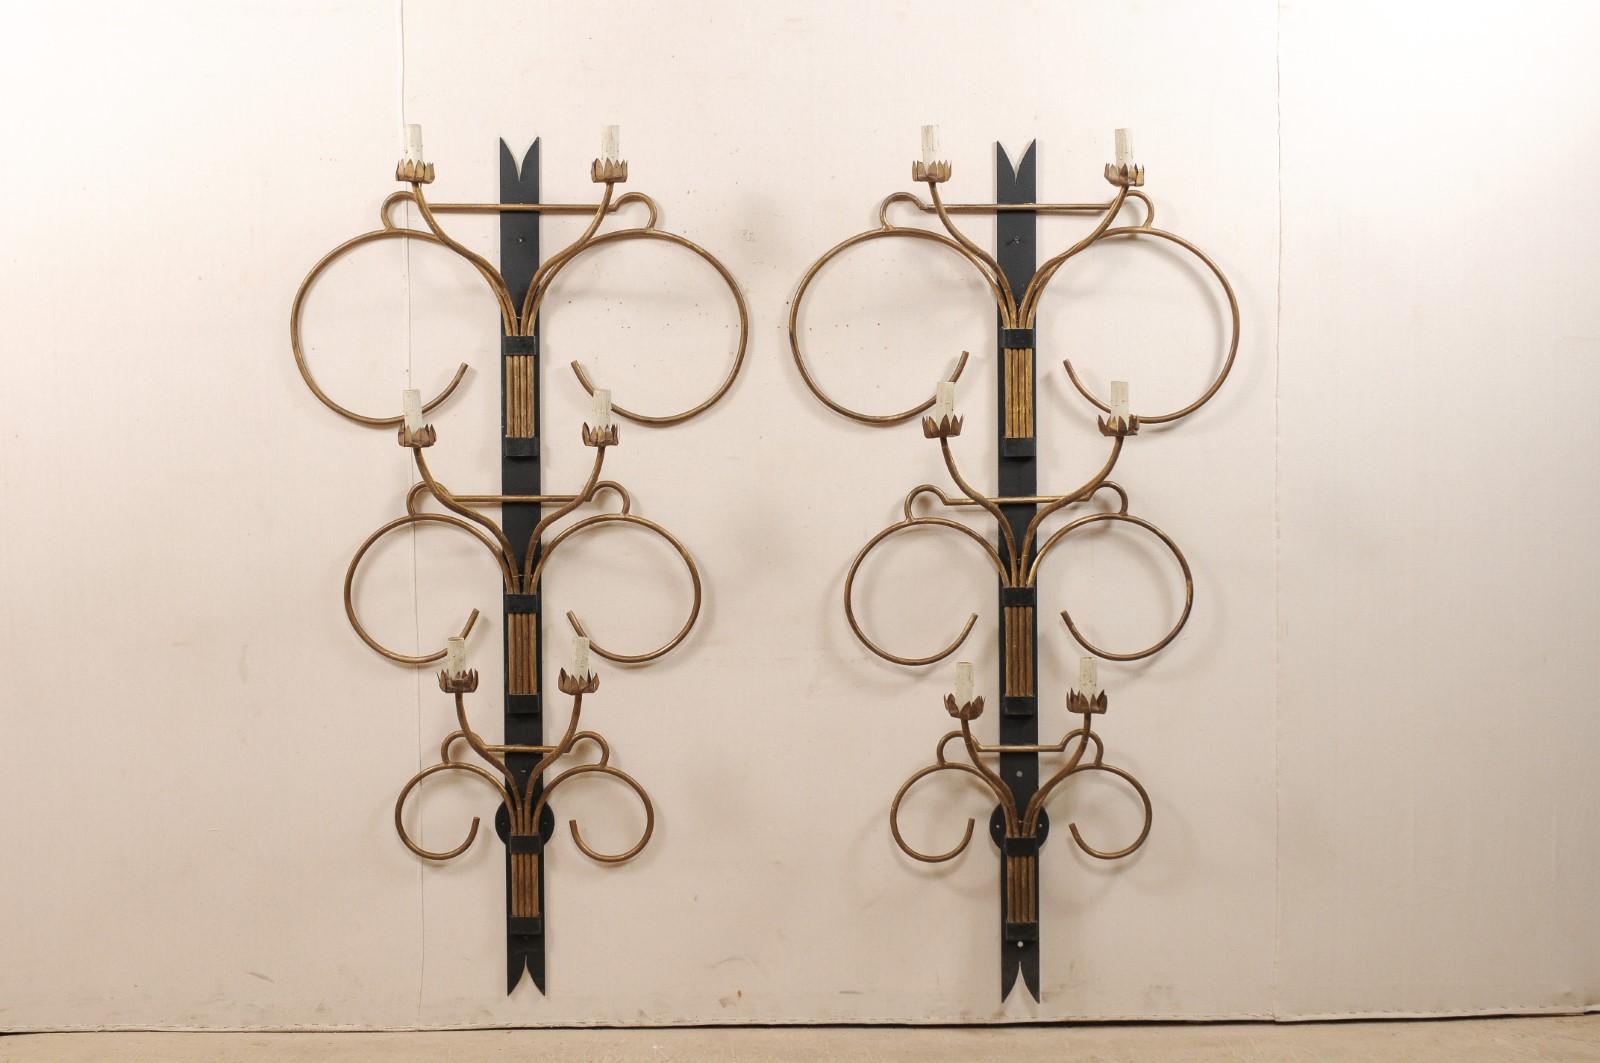 A fabulous pair of large-sized French Art Deco style sconces from the mid-20th century. These black and gold mid-century pair of sconces from France are impressively sized and just under 6 feet in height, and approximately 3 feet wide across their